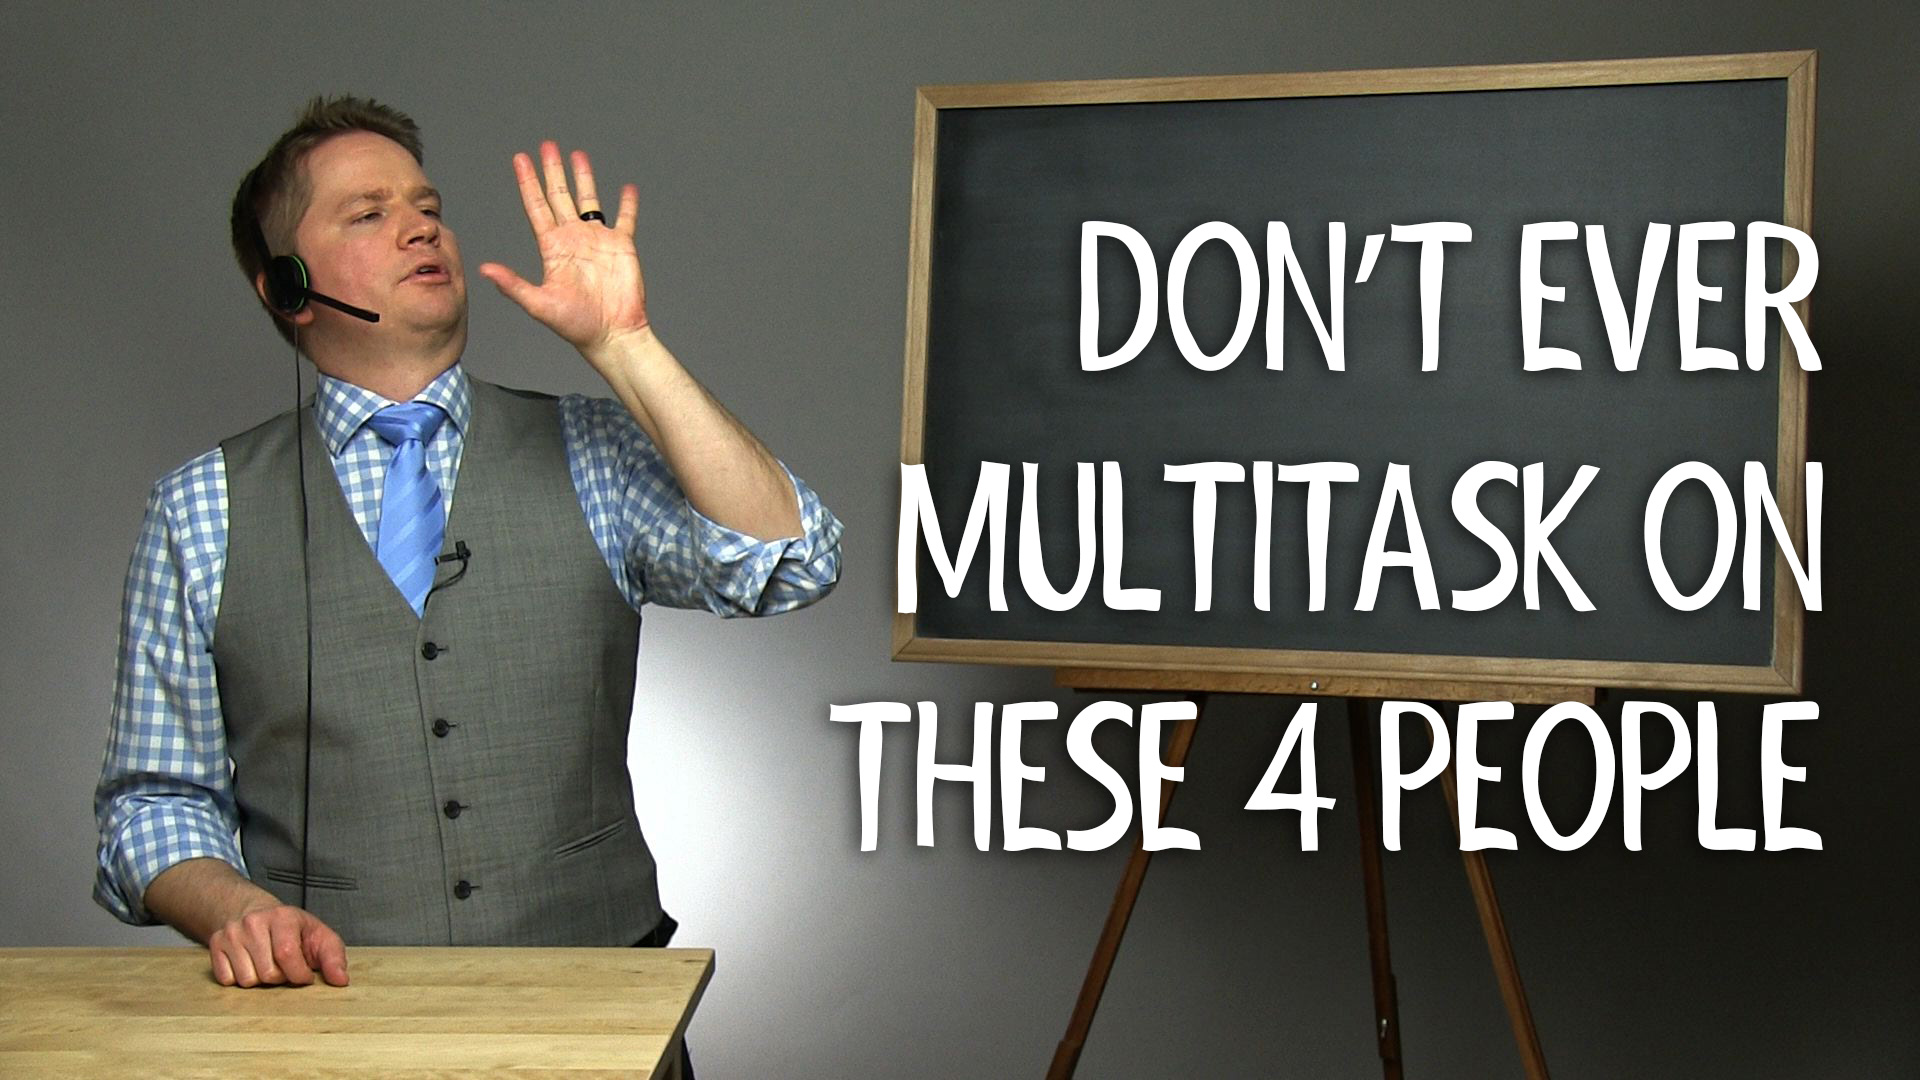 Don’t Ever Multitask on These 4 People – The Myth of Multitasking